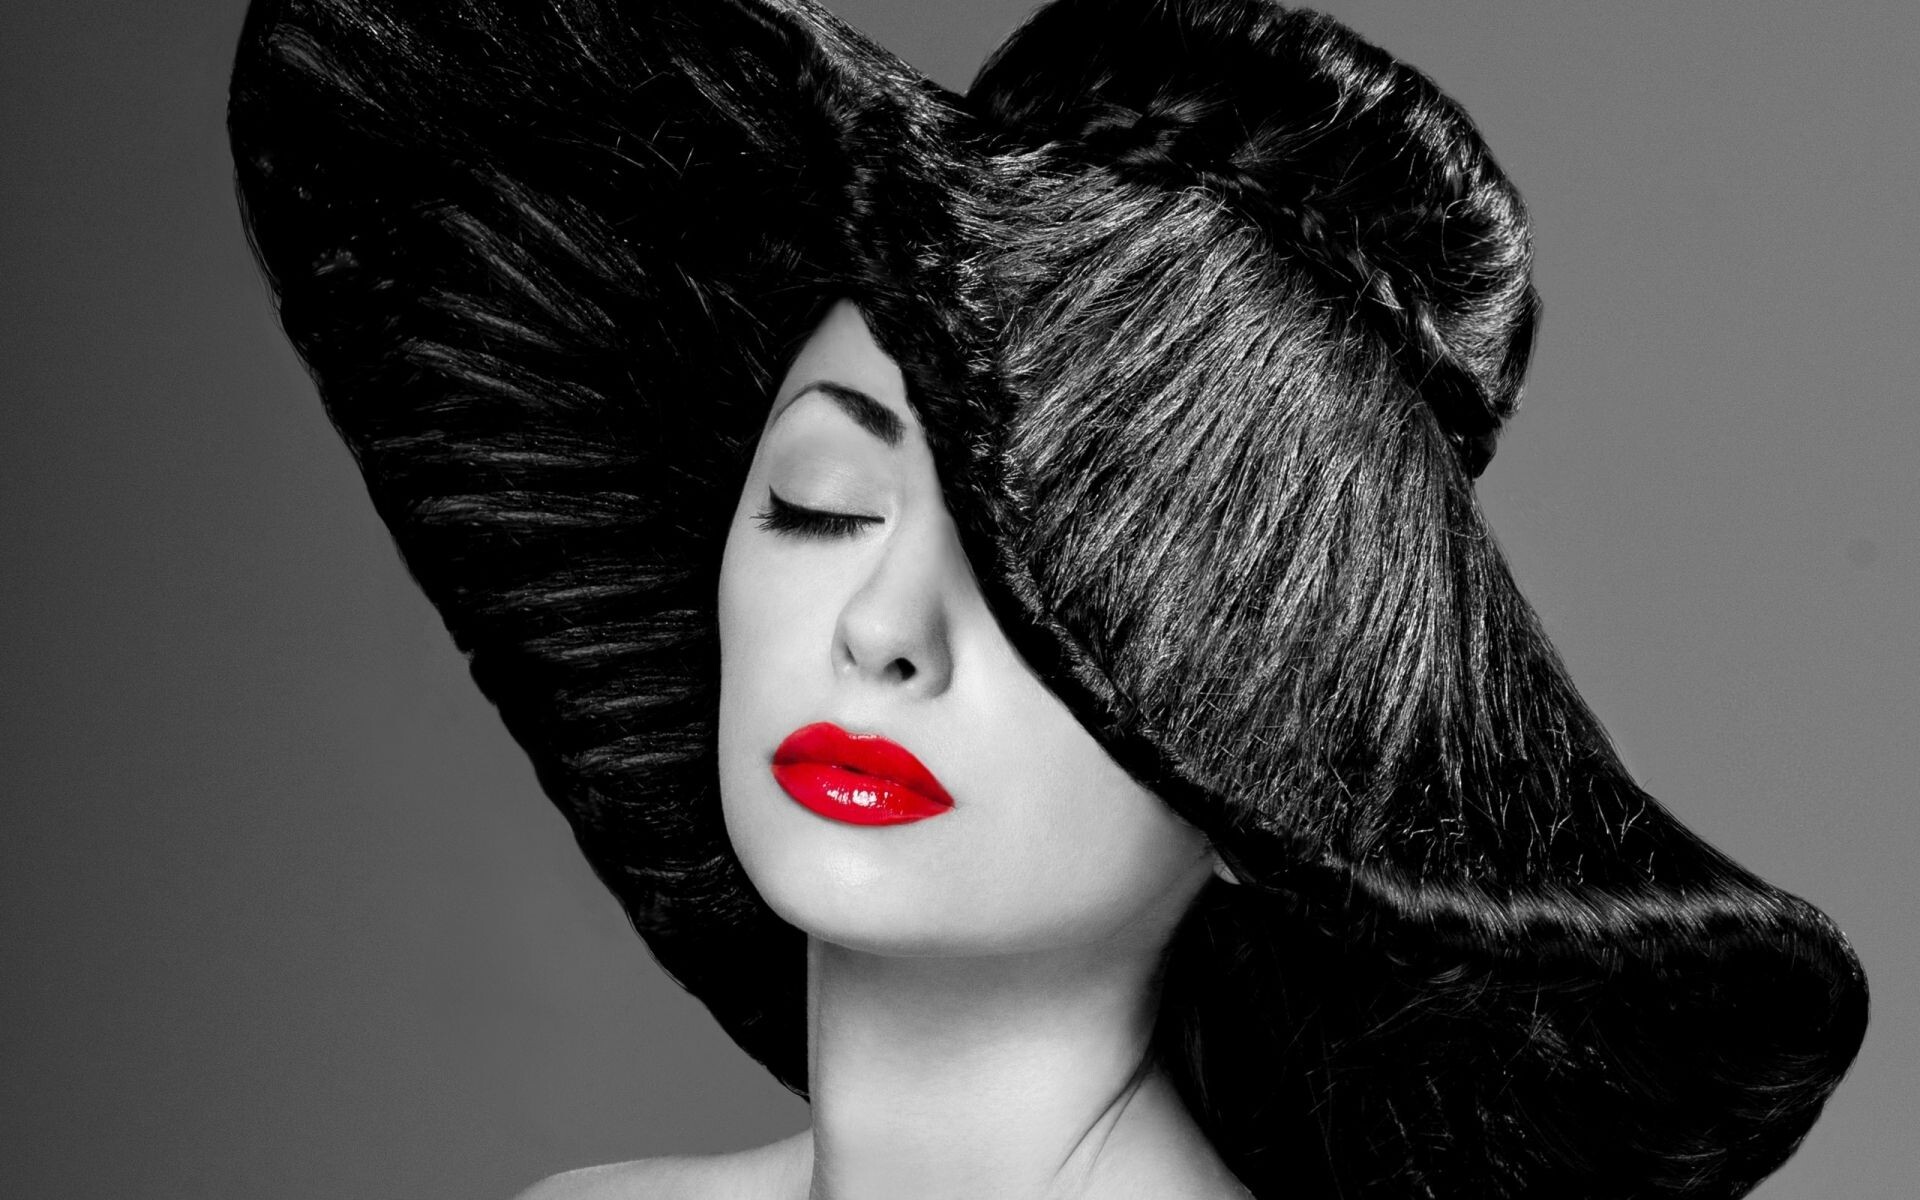 Lipstick: Hollywood bombshell look, Red lip makeup, Black and white, Red color commanding attention. 1920x1200 HD Wallpaper.